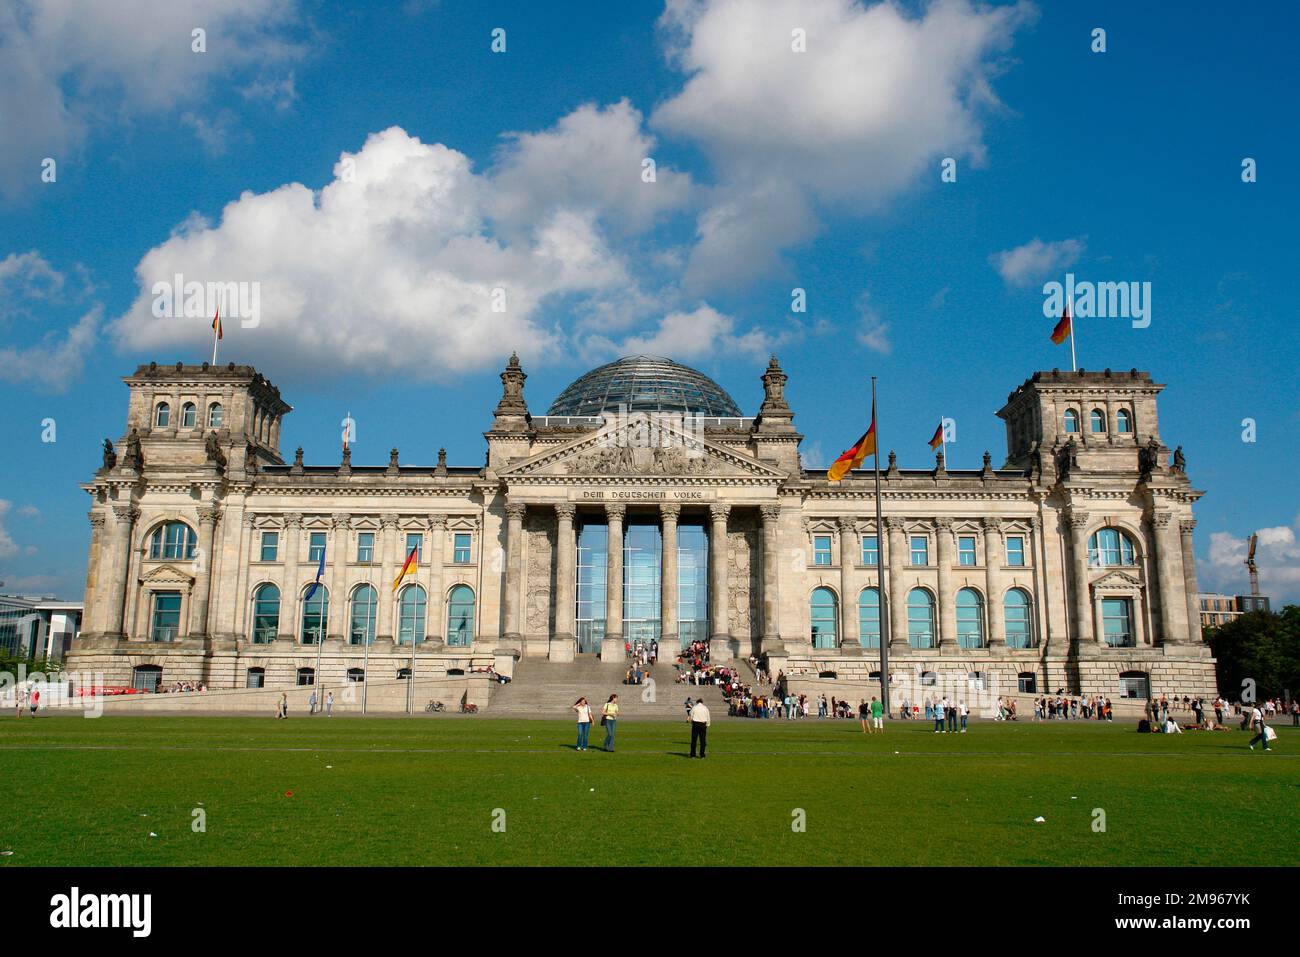 View of the front facade of the Reichstag building in Berlin, Germany.  The building opened in 1894 to house the German parliament. It was severely damaged by fire in 1933, and its reconstruction was not completed until 1999. The dedication, 'Dem Deutschen Volke', 'For the German People', is inscribed on the architrave. Stock Photo